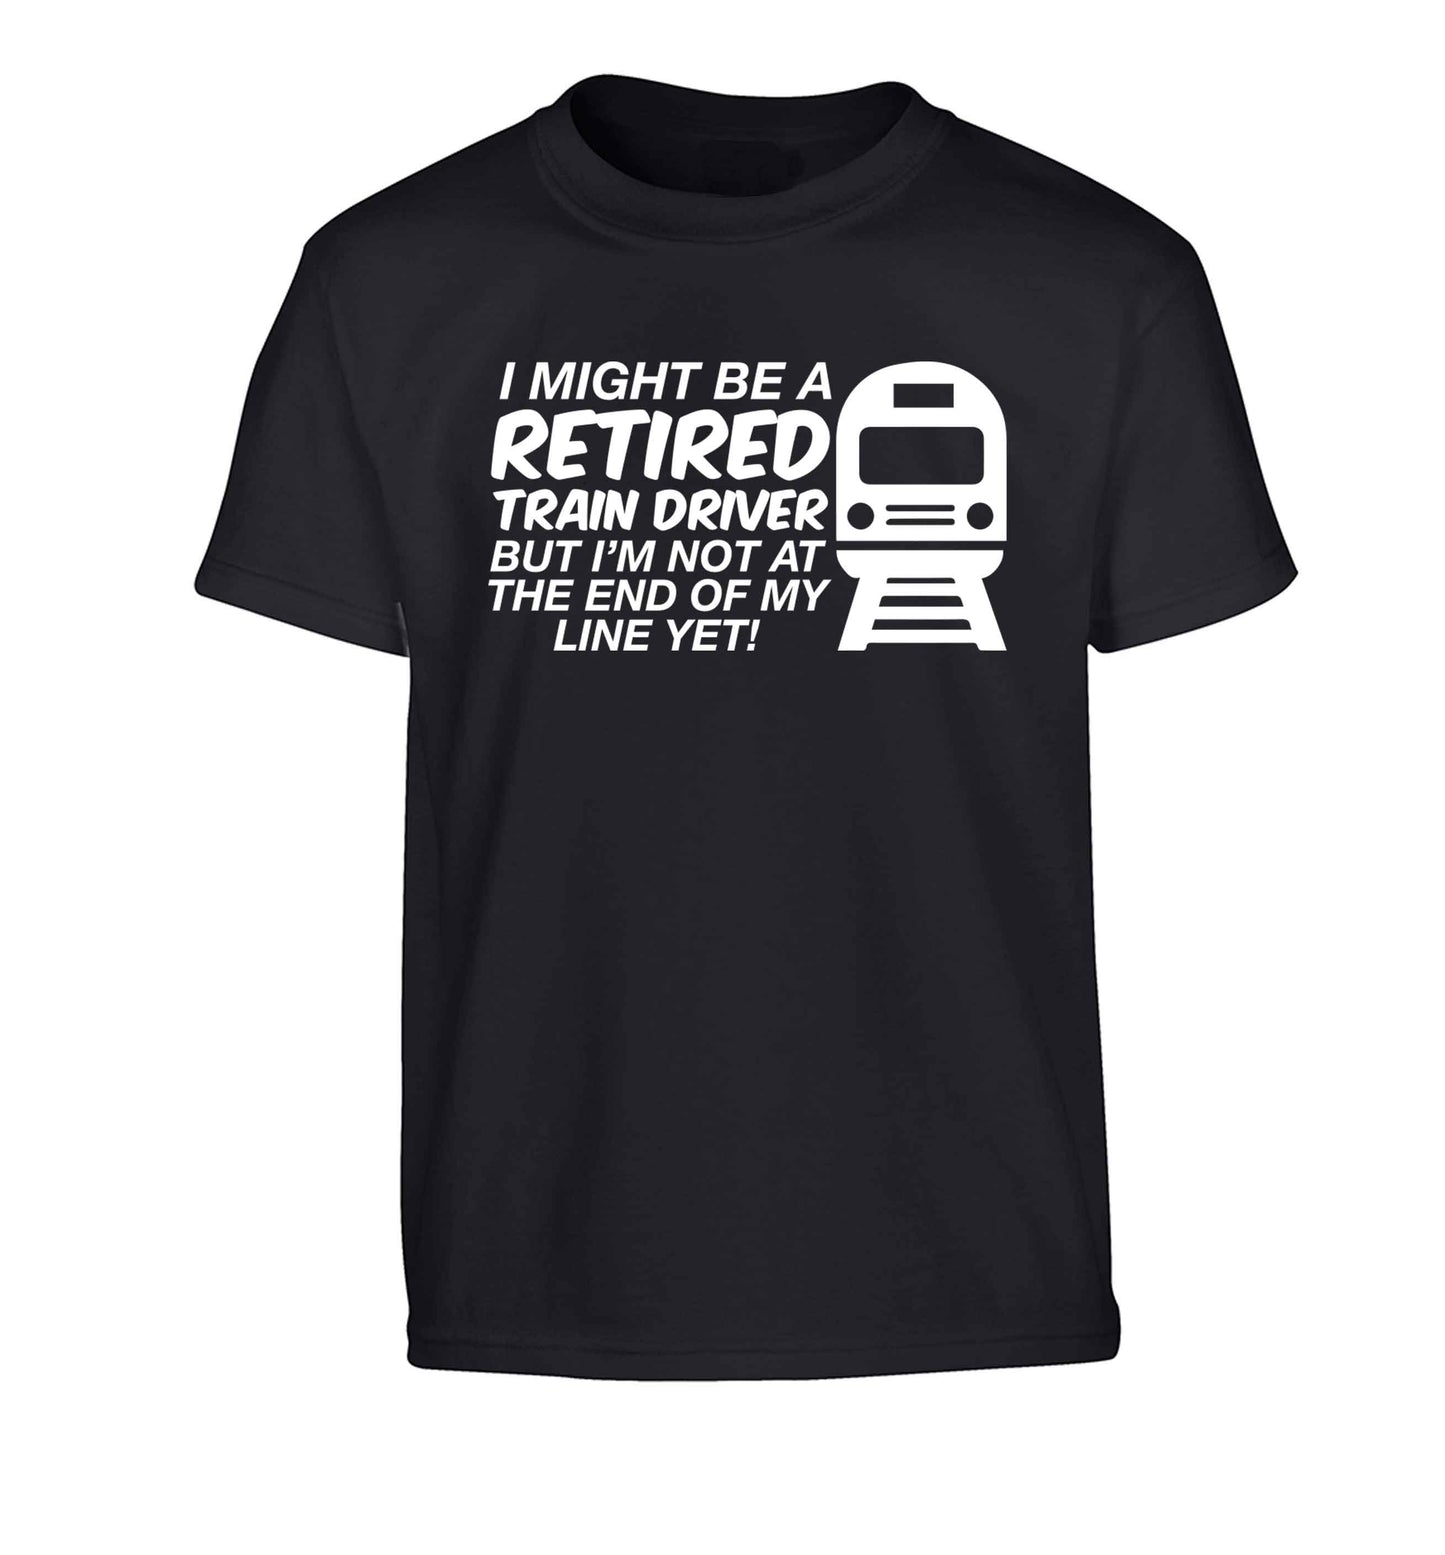 Retired train driver but I'm not at the end of my line yet Children's black Tshirt 12-13 Years